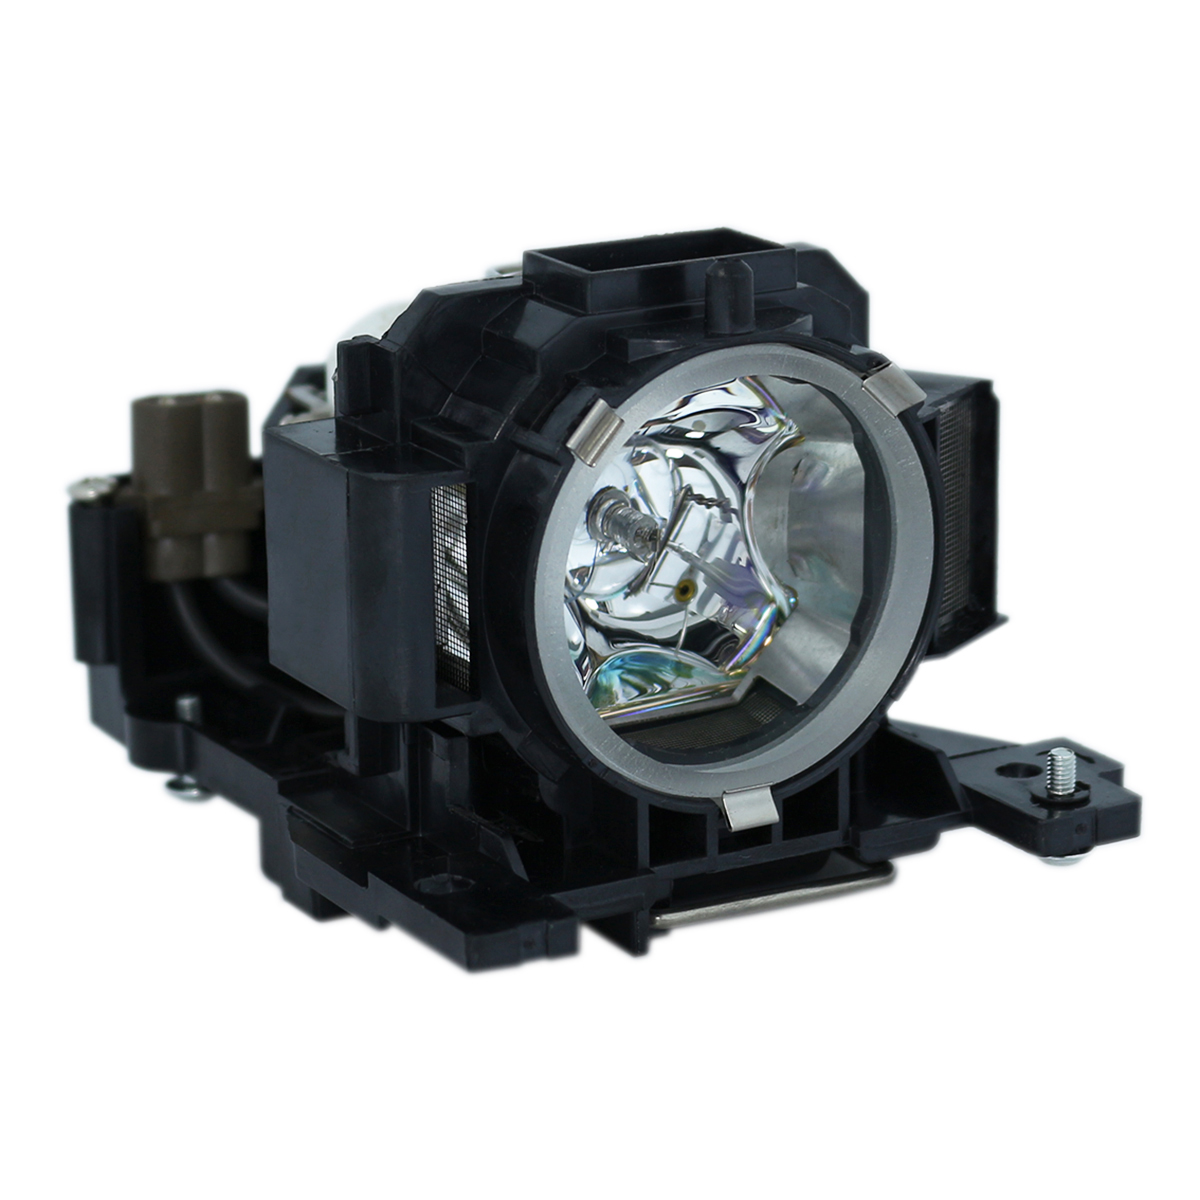 DT00891 Replacement Lamp & Housing for Hitachi Projectors - image 3 of 6